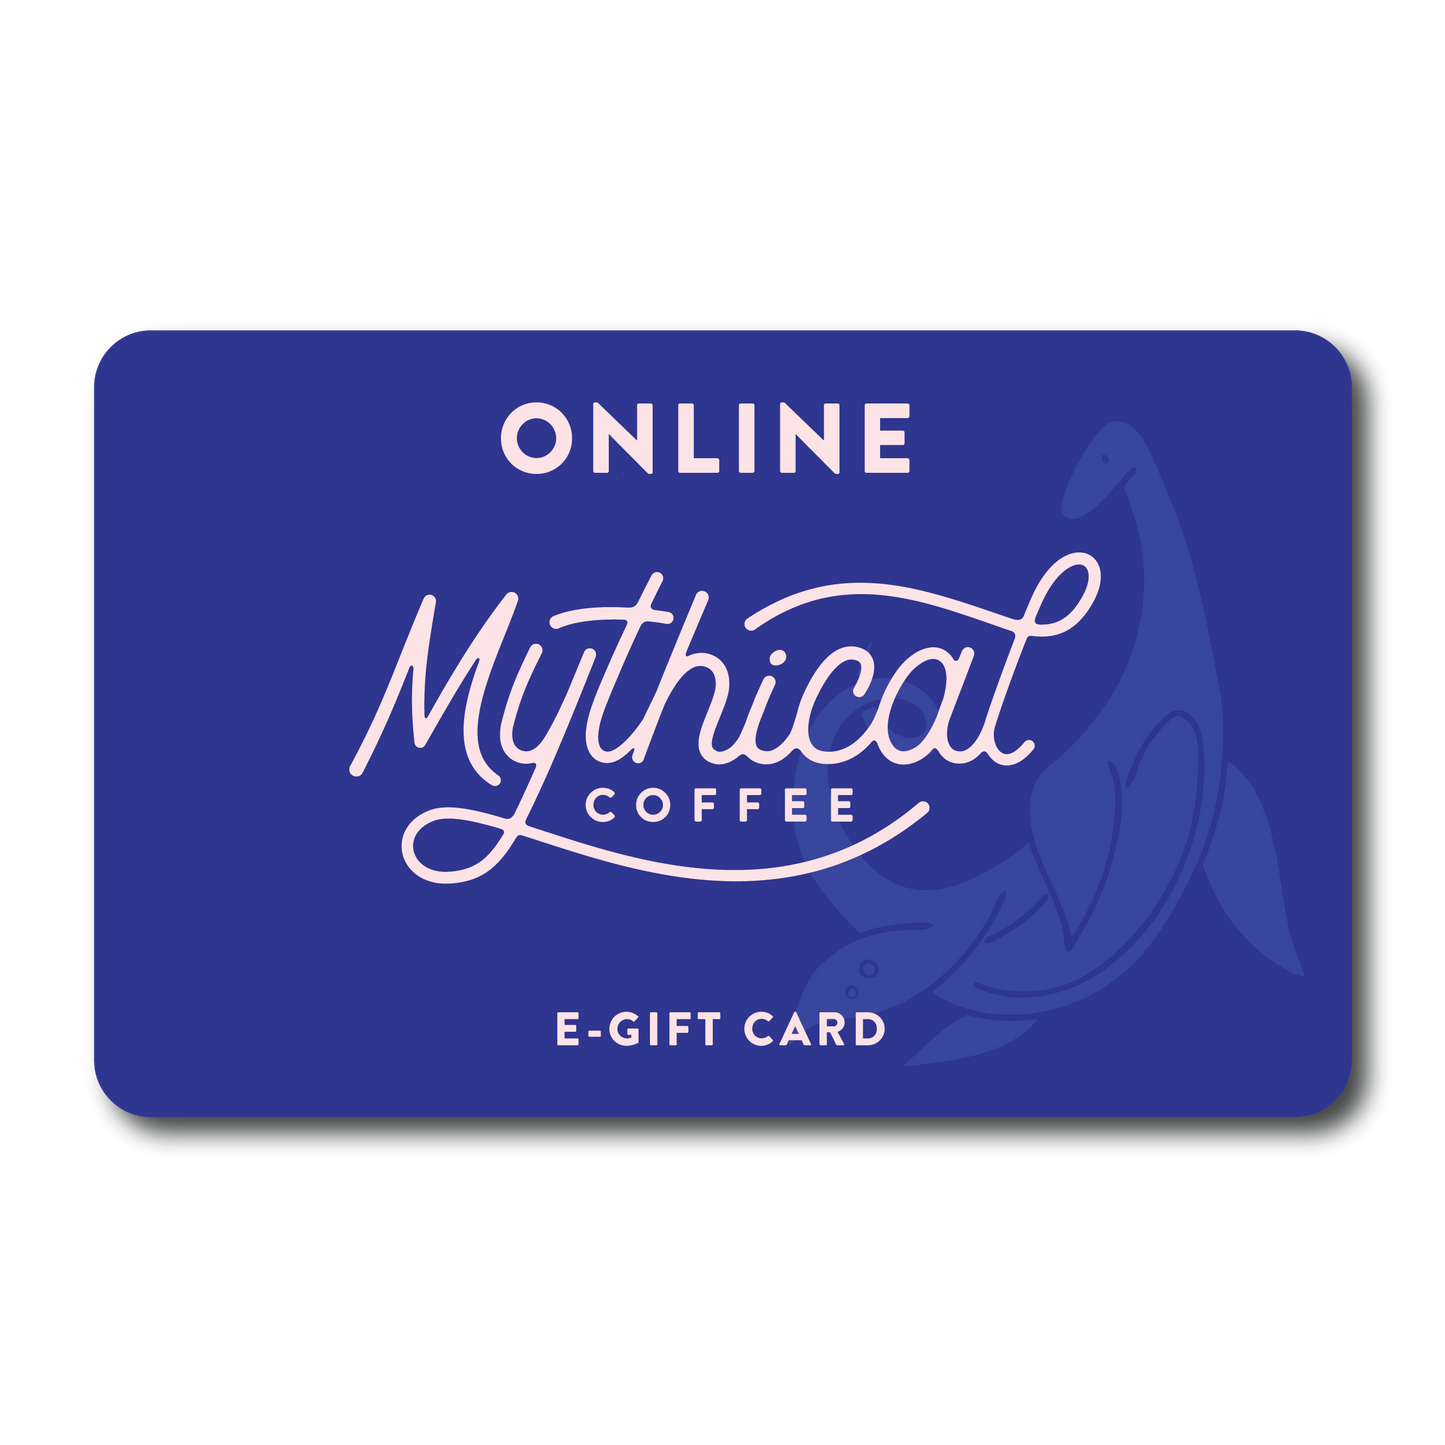 Mythical Coffee Online Gift Card